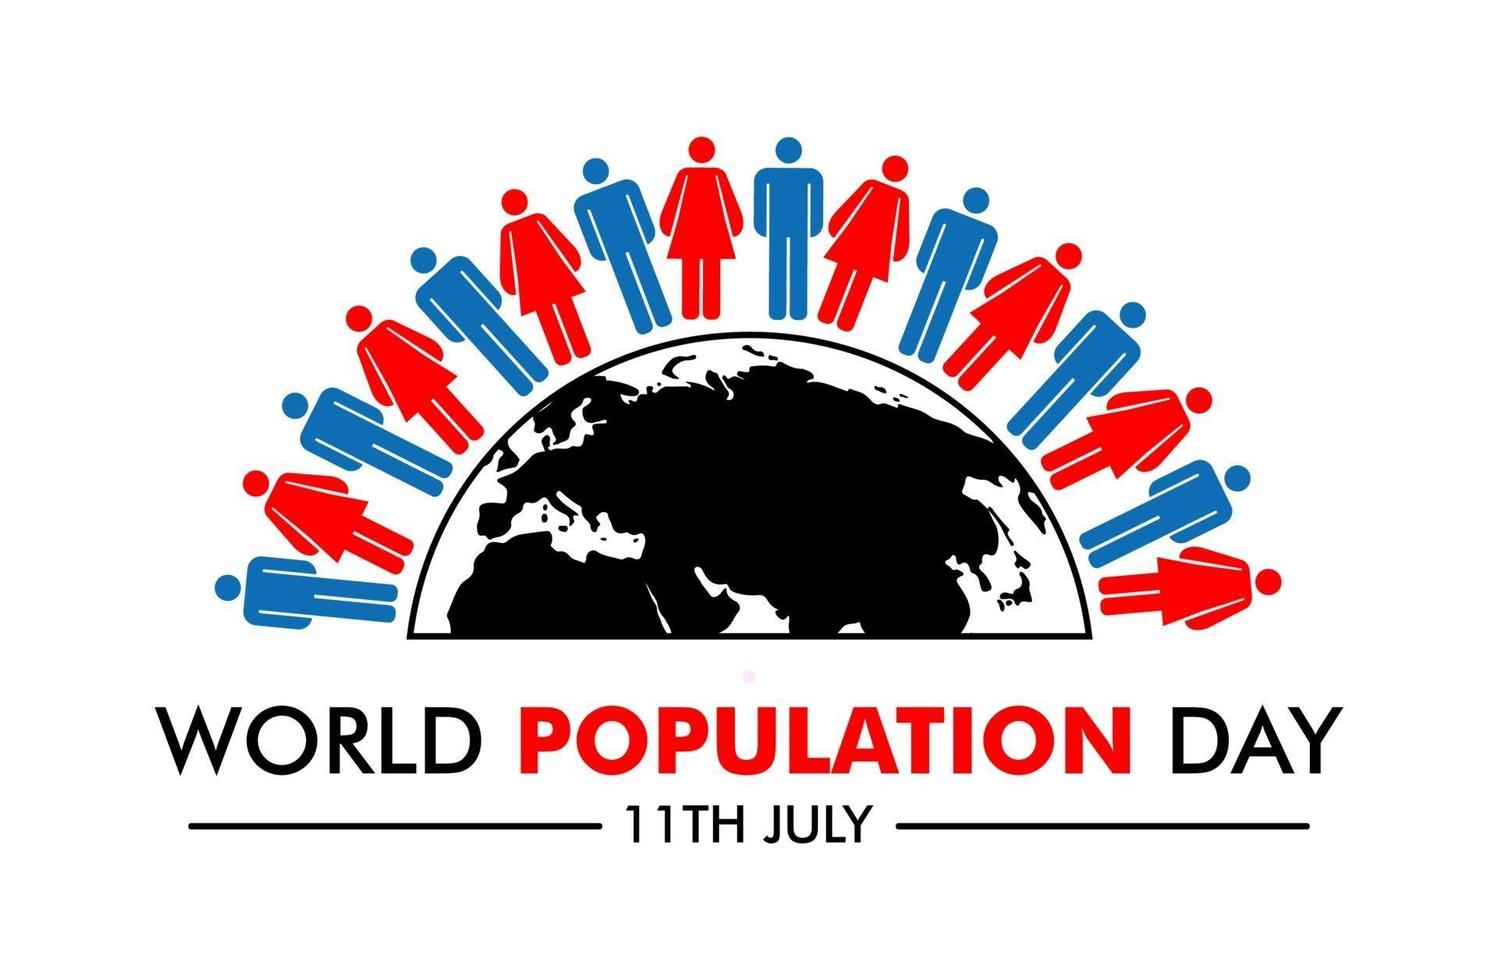 world population day vector image july 11th